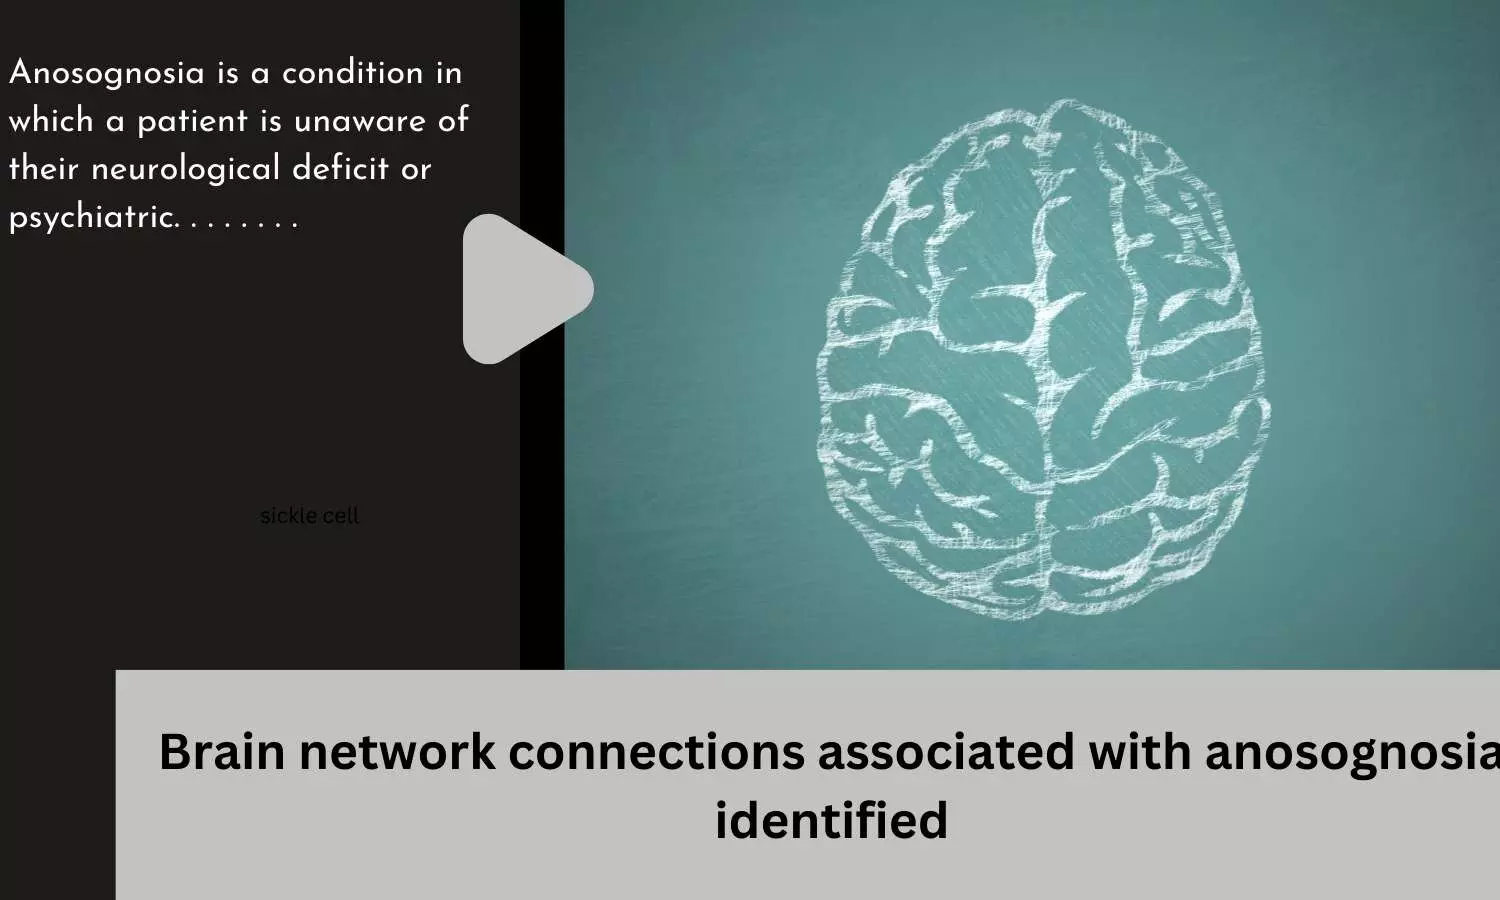 Brain network connections associated with anosognosia identified